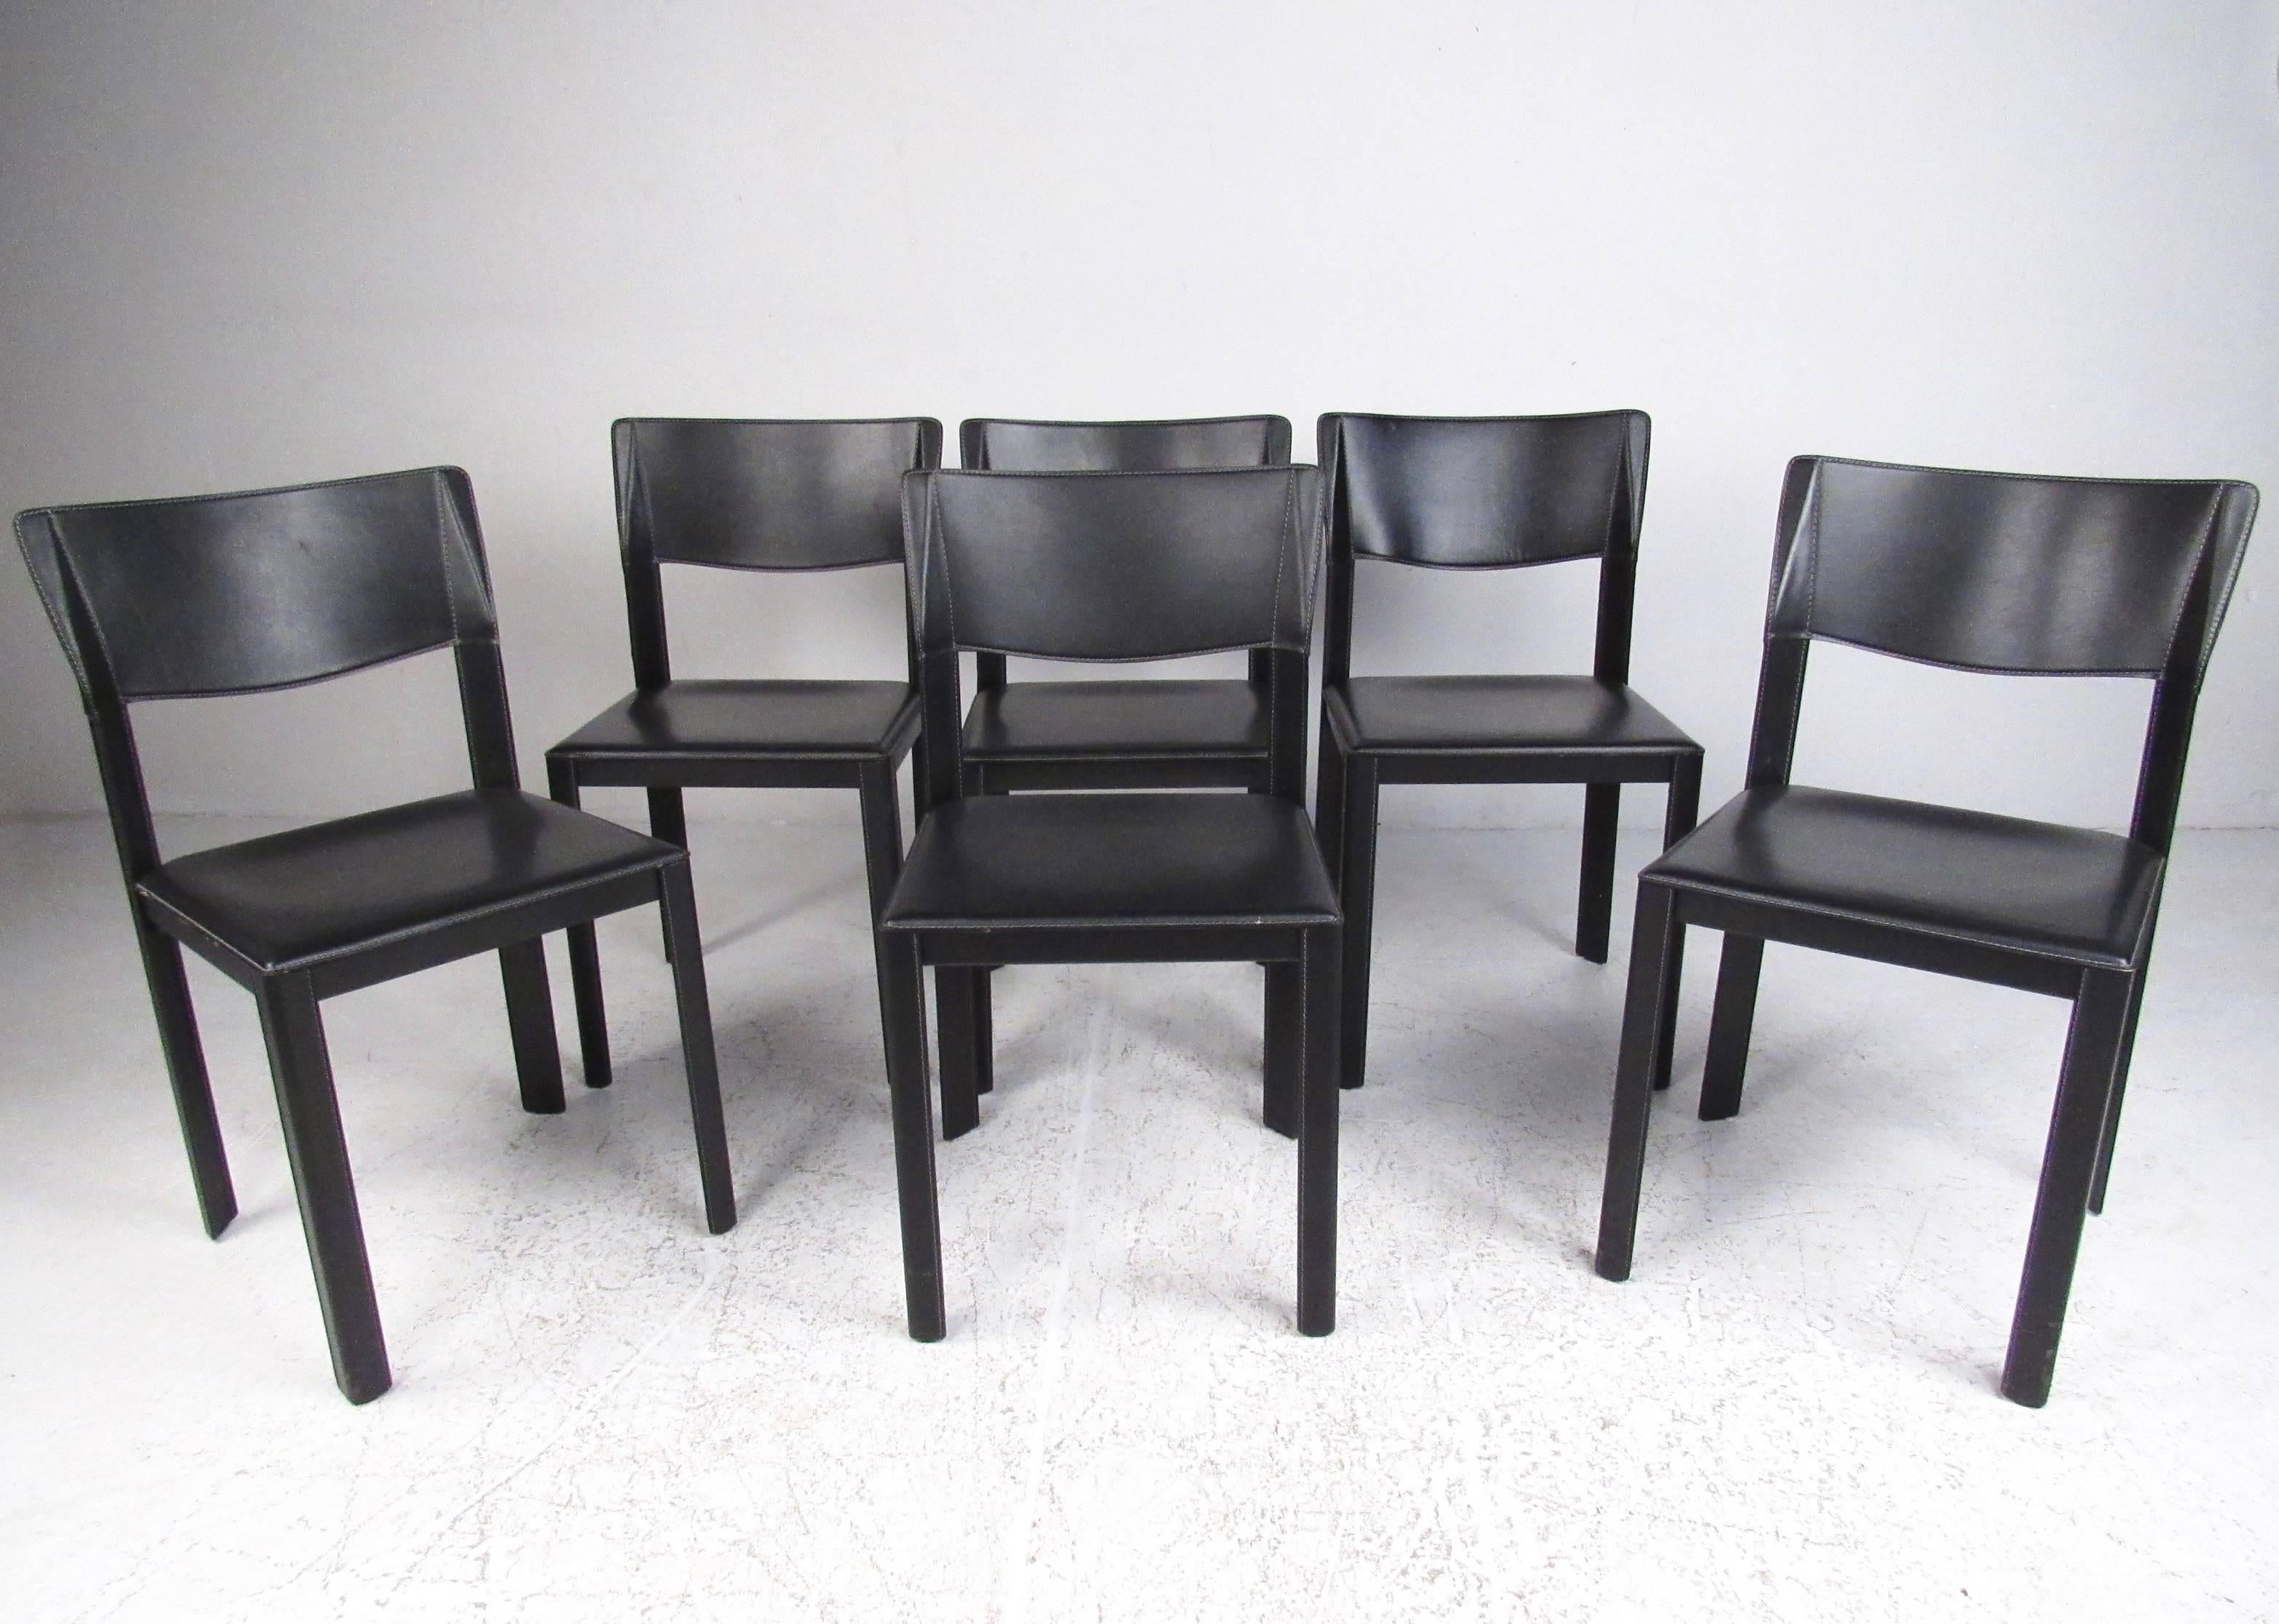 This stylish set of contemporary modern dining chairs feature leather upholstery with stitched edge trim. Sleek Italian design is the perfect mix of comfort and style, perfect dining room chairs. Please confirm item location (NY or NJ).